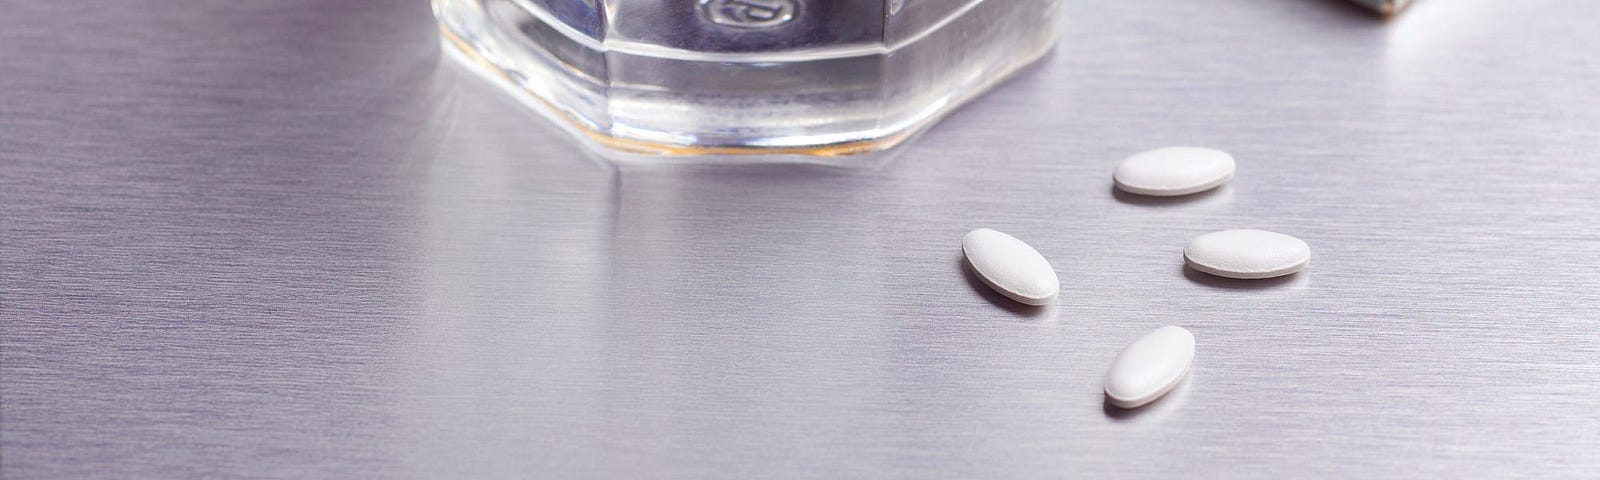 Glass of water with pills beside it